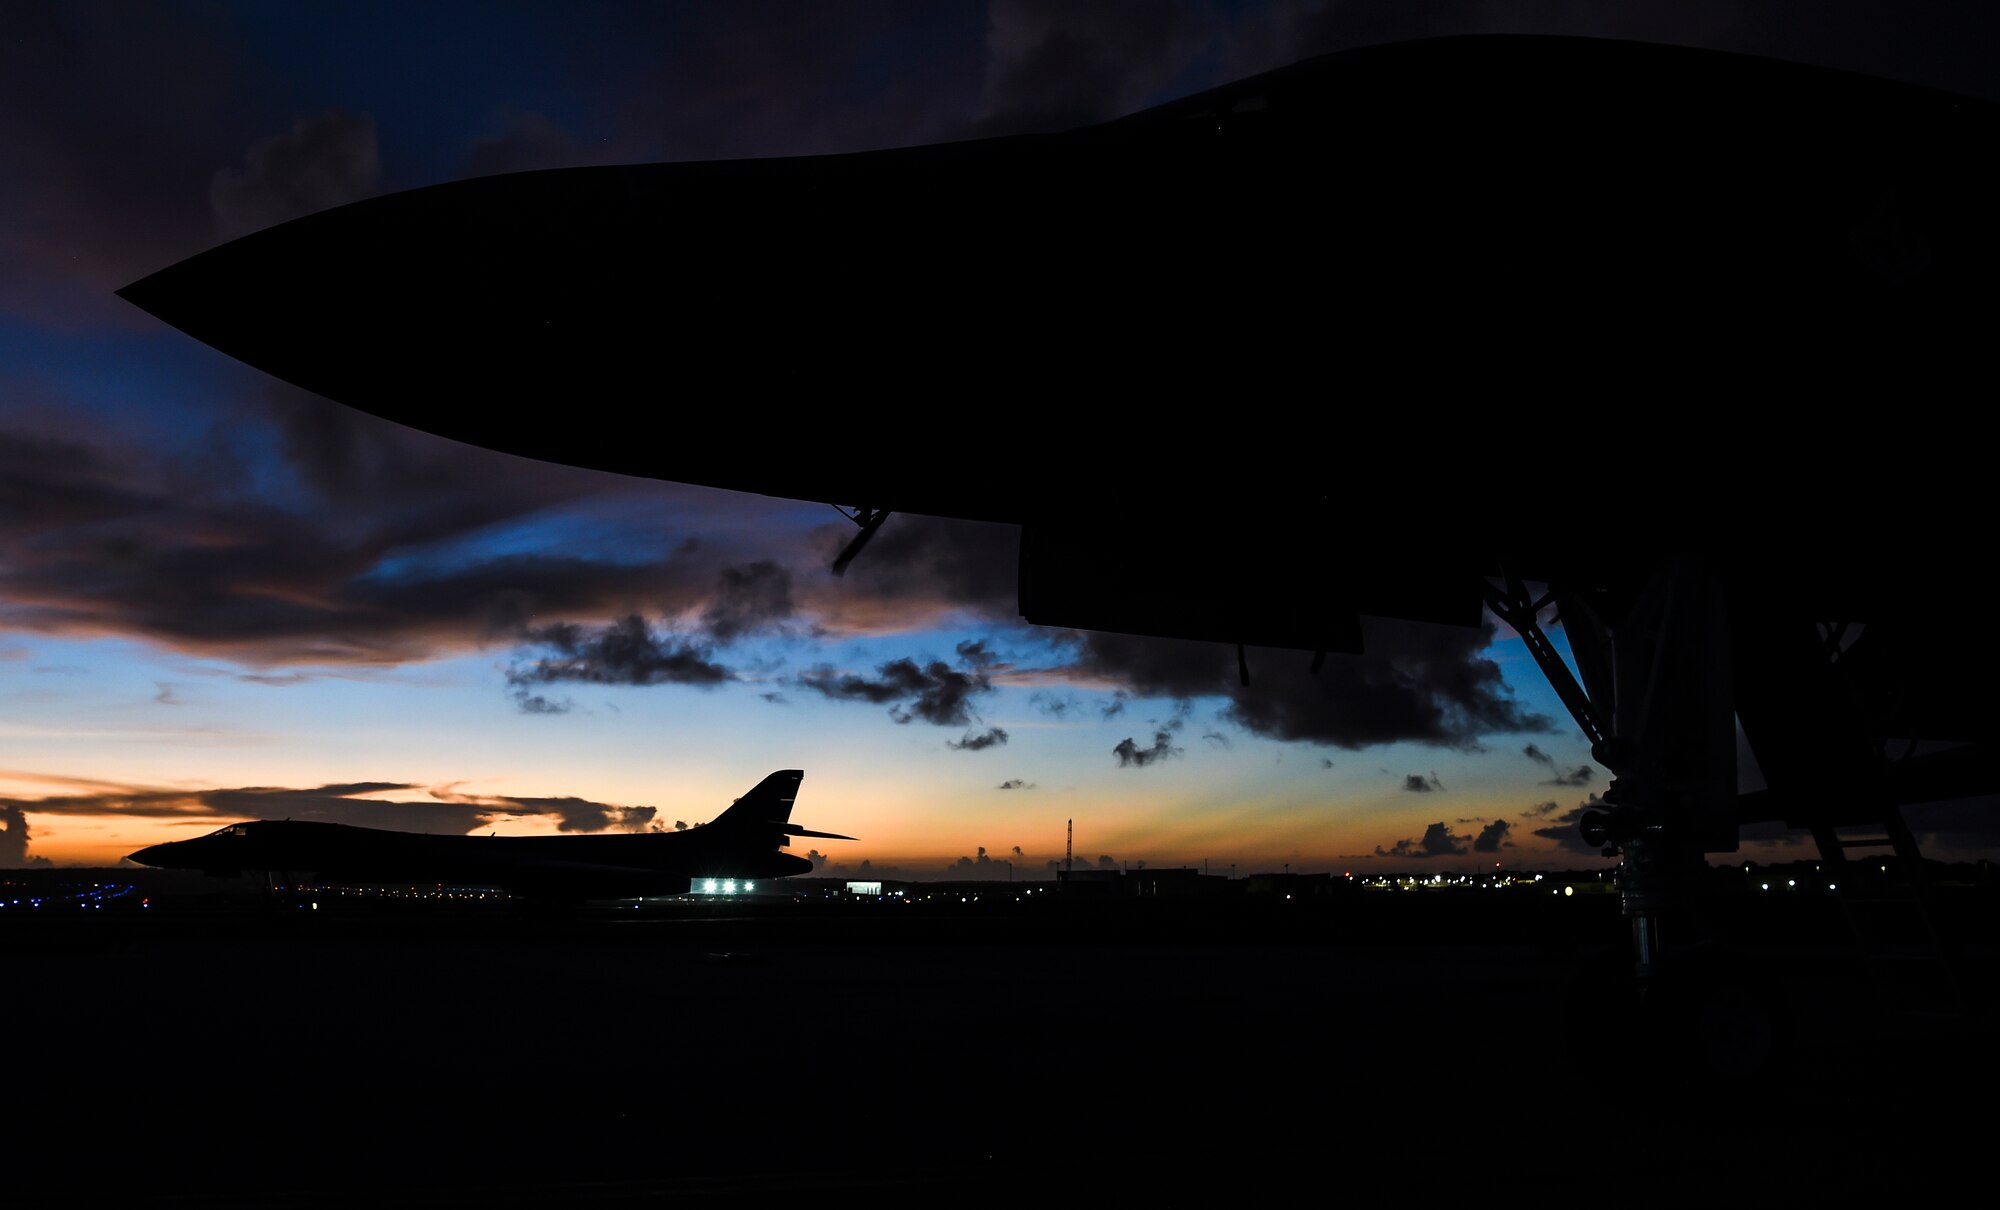 Two U.S. Air Force B-1B Lancers sit on the flightline after participating in a joint interoperability exercise at Andersen Air Force Base, Guam, Nov. 13, 2020. The exercise enabled the aircrew to test long-range force packaging and demonstrate global reach capabilities in the Indo-Pacific region. (U.S. Air Force photo by Staff Sgt. David Owsianka)